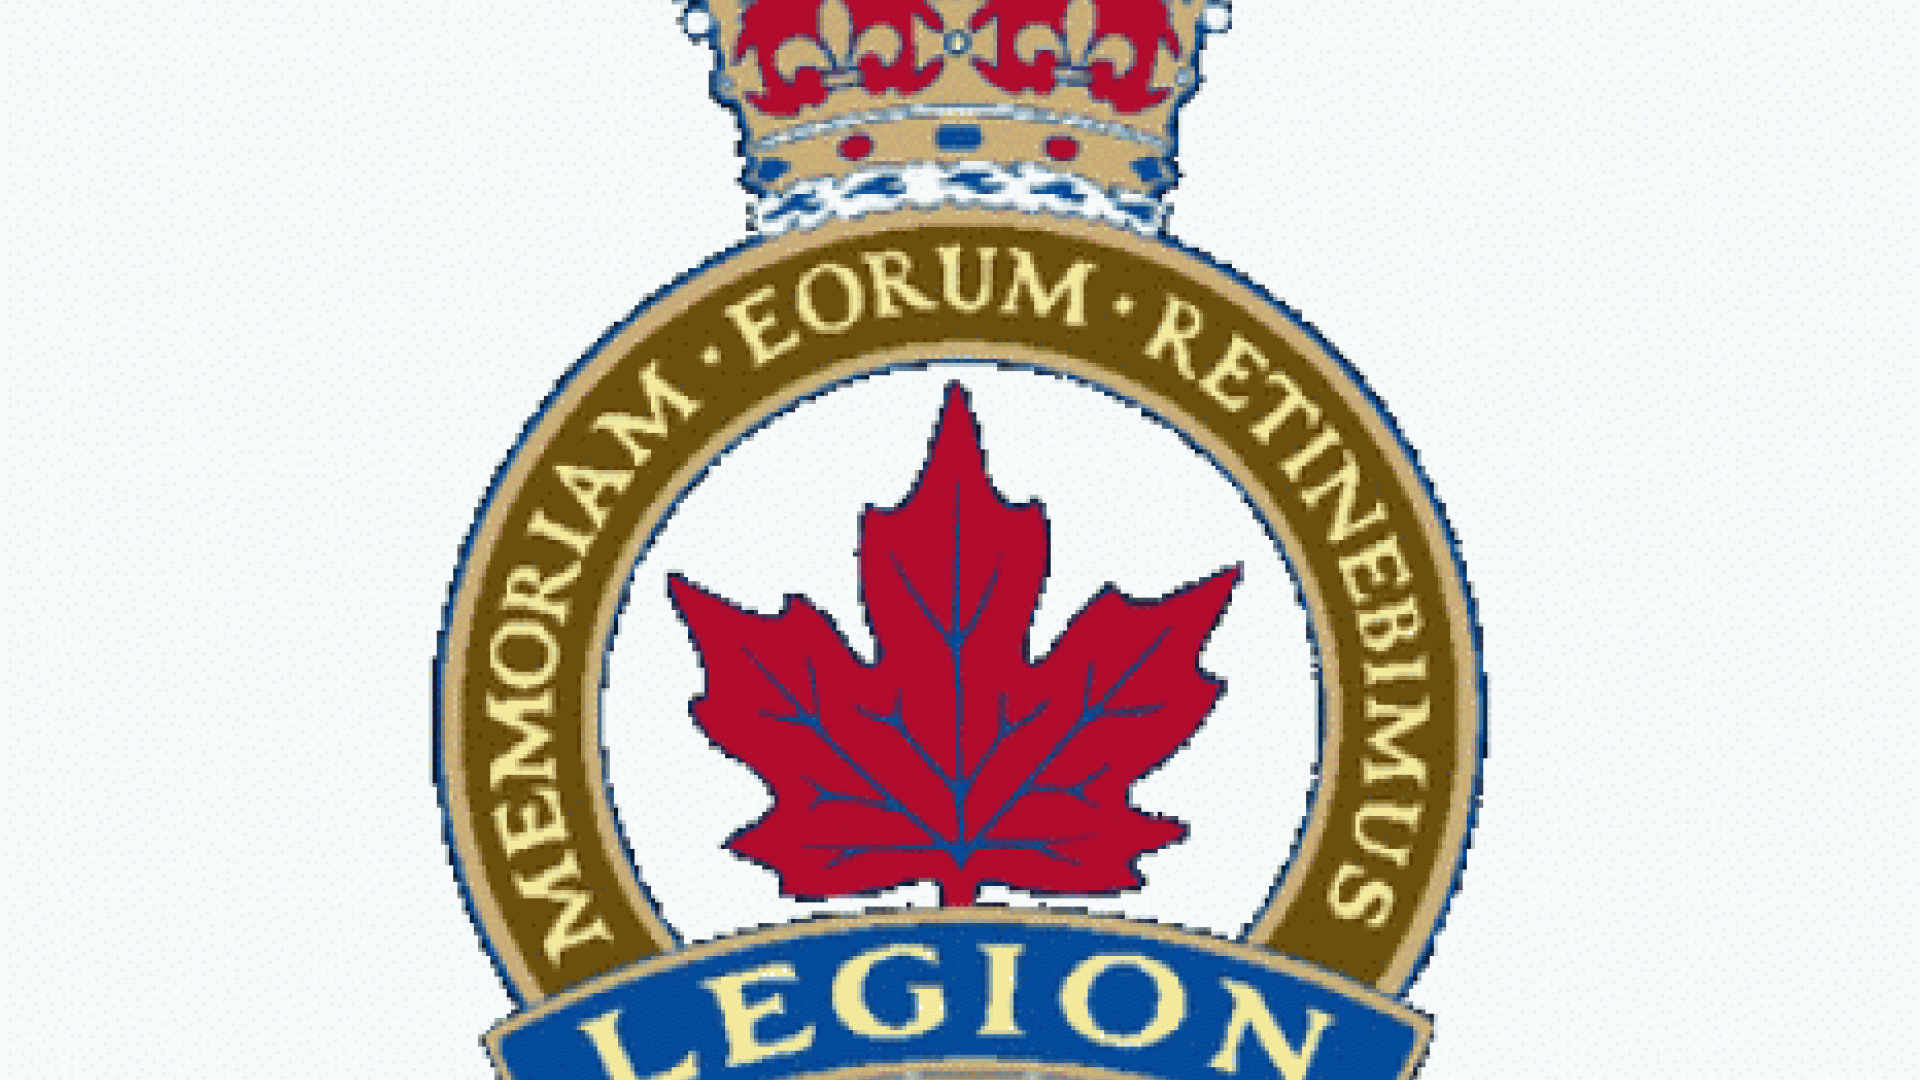 Royal Canadian Legion shield. The shield has a crown on top, red poppy flowers in the bottom and a red maple leaf in the center.